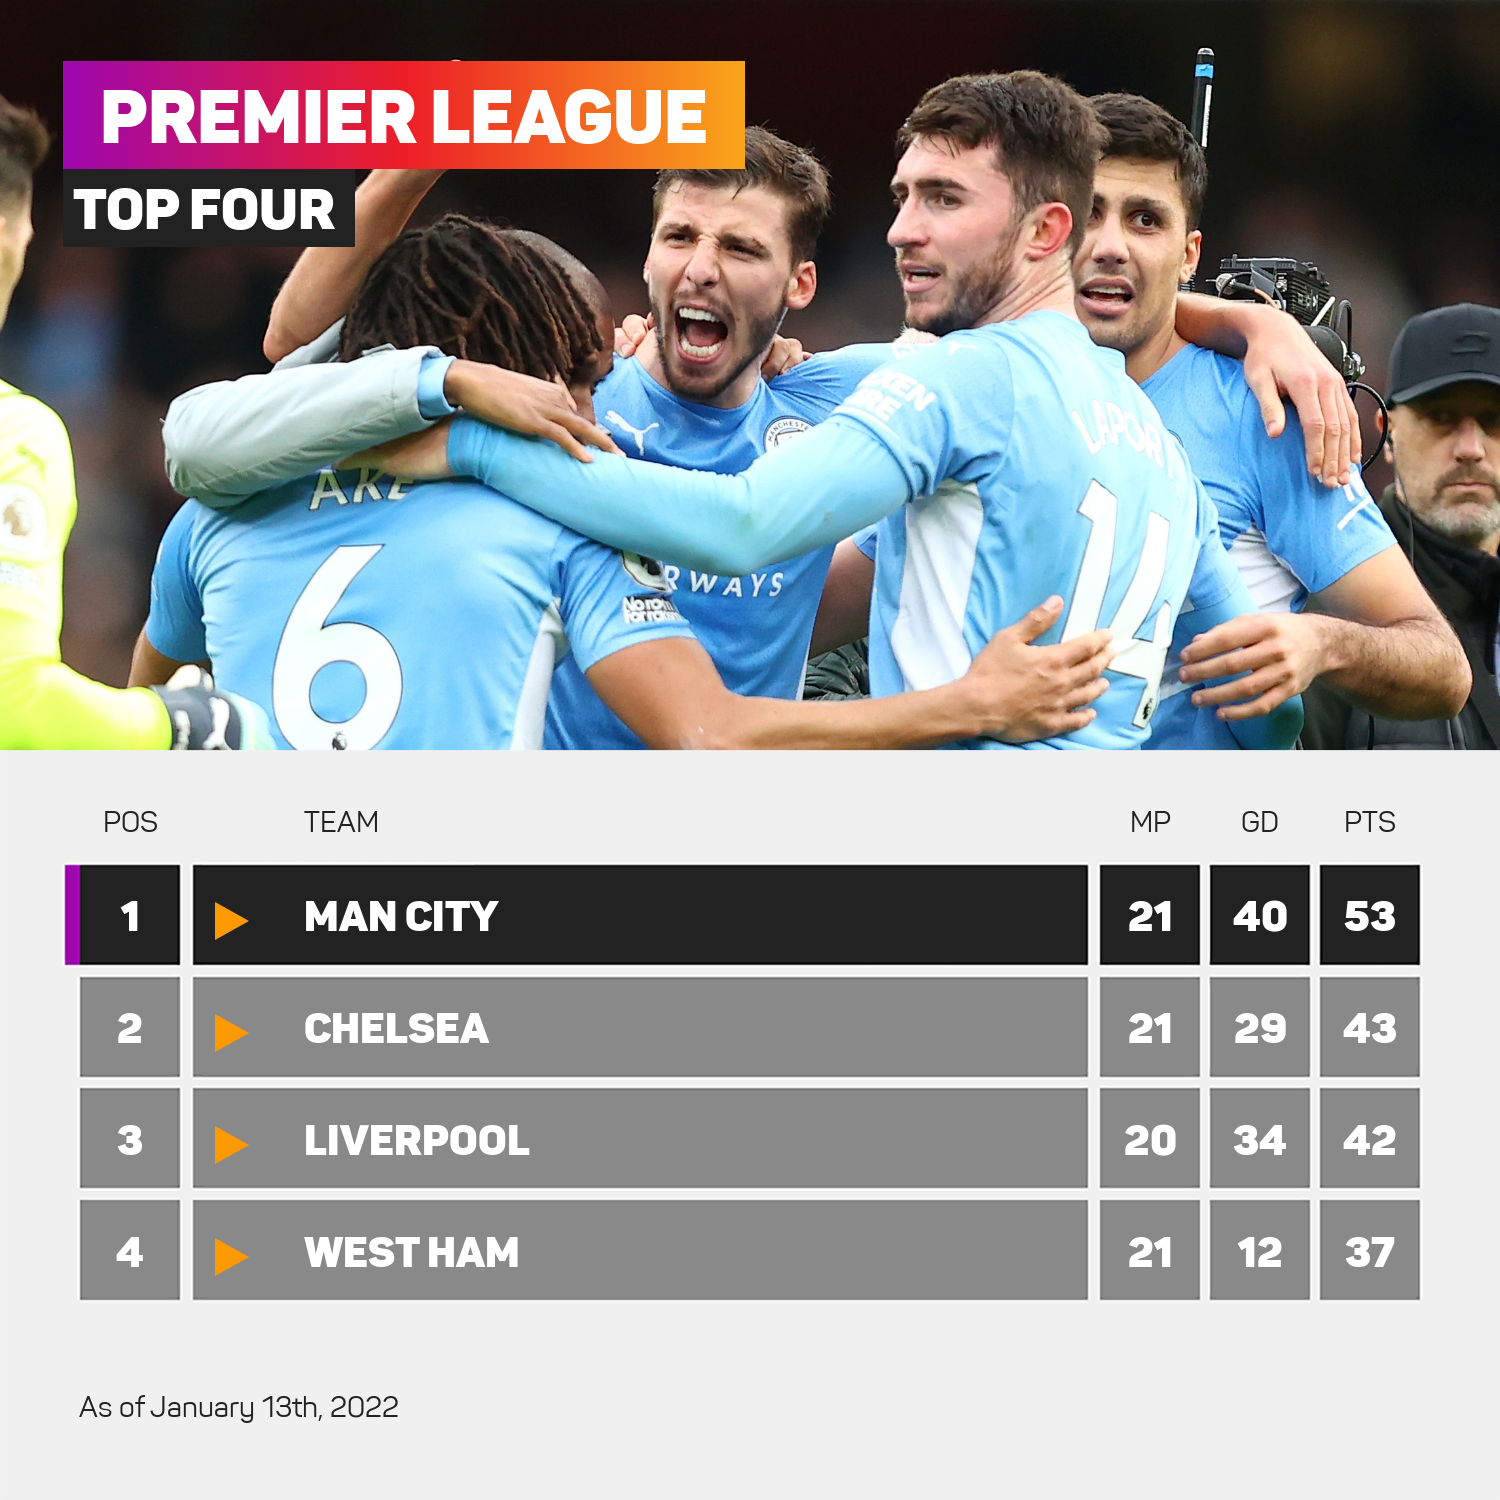 Man City have a healthy lead at the summit of the table